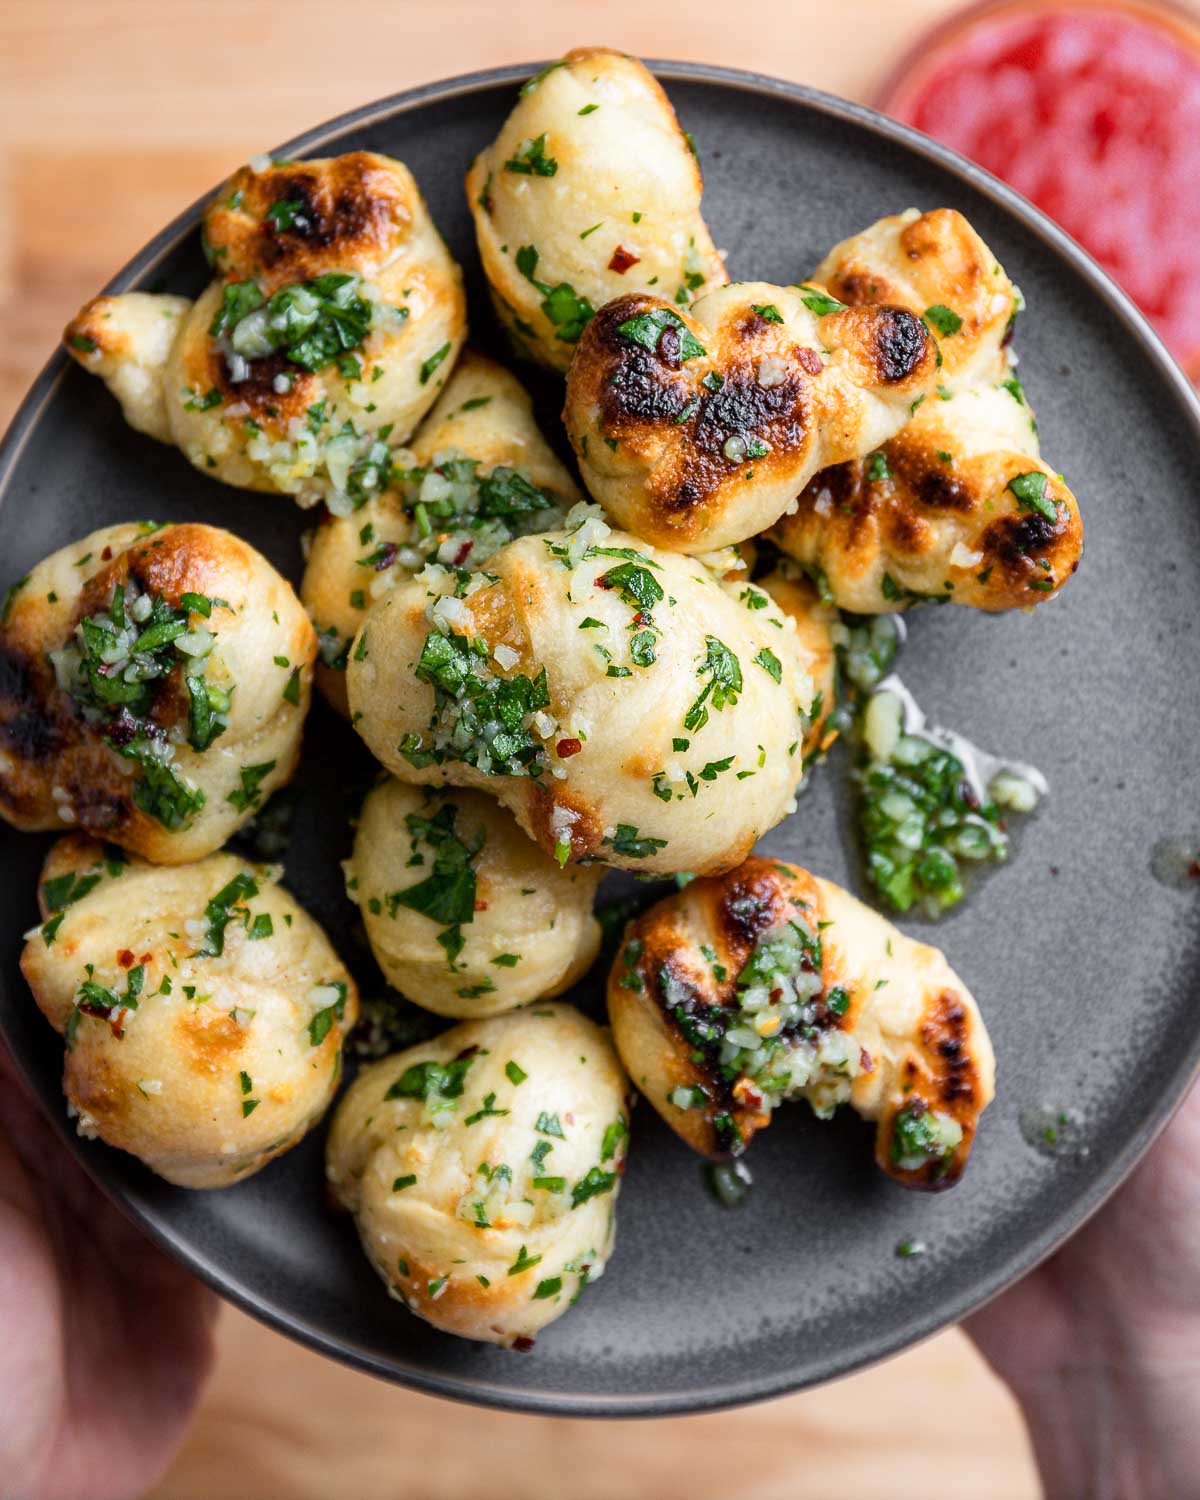 Hands holding garlic knots in grey plate.